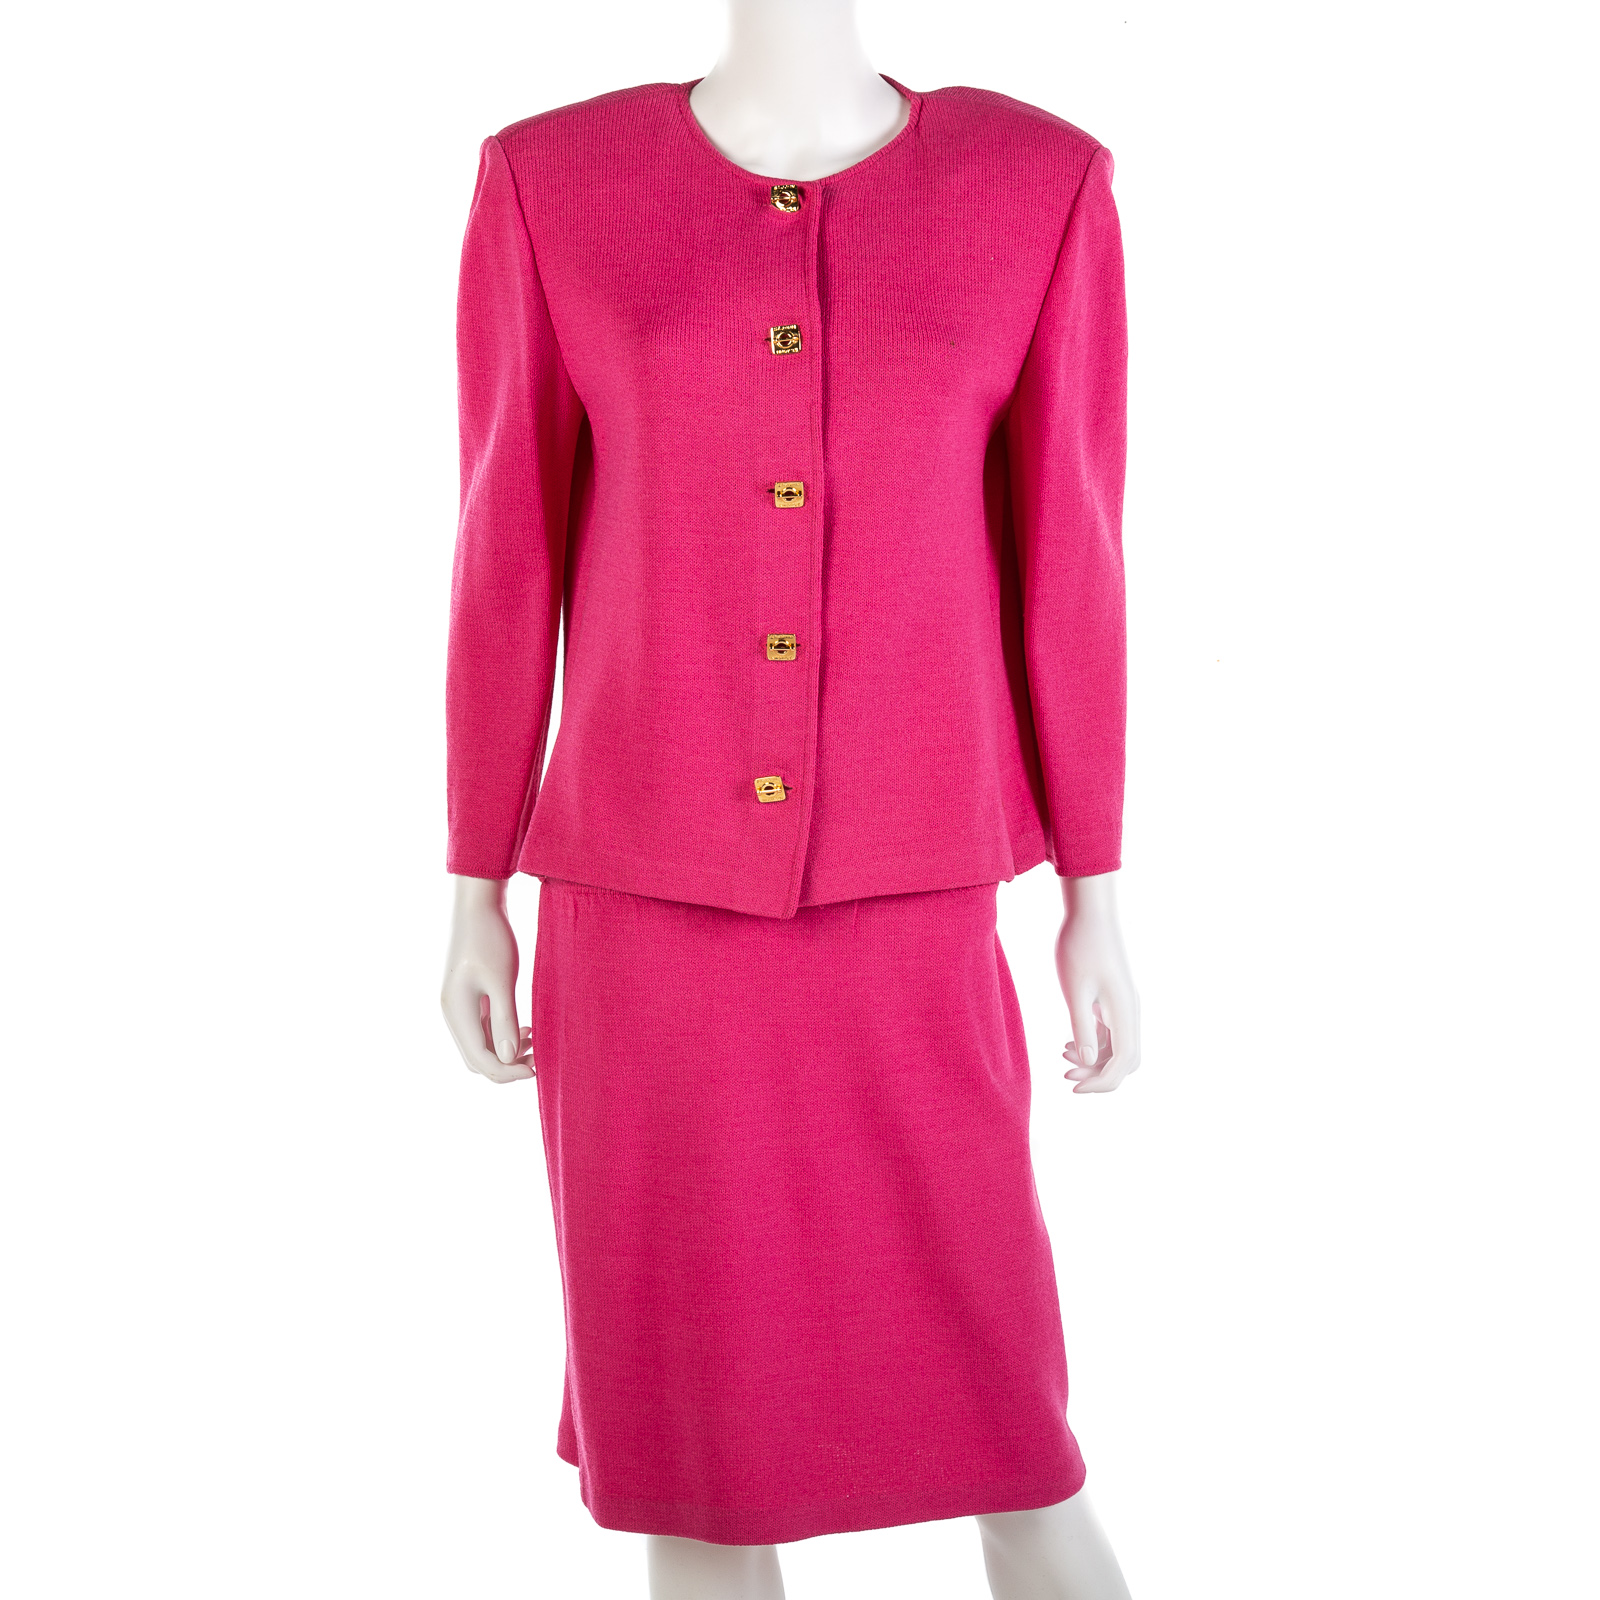 ST. JOHN PINK KNITTED SUIT jacket